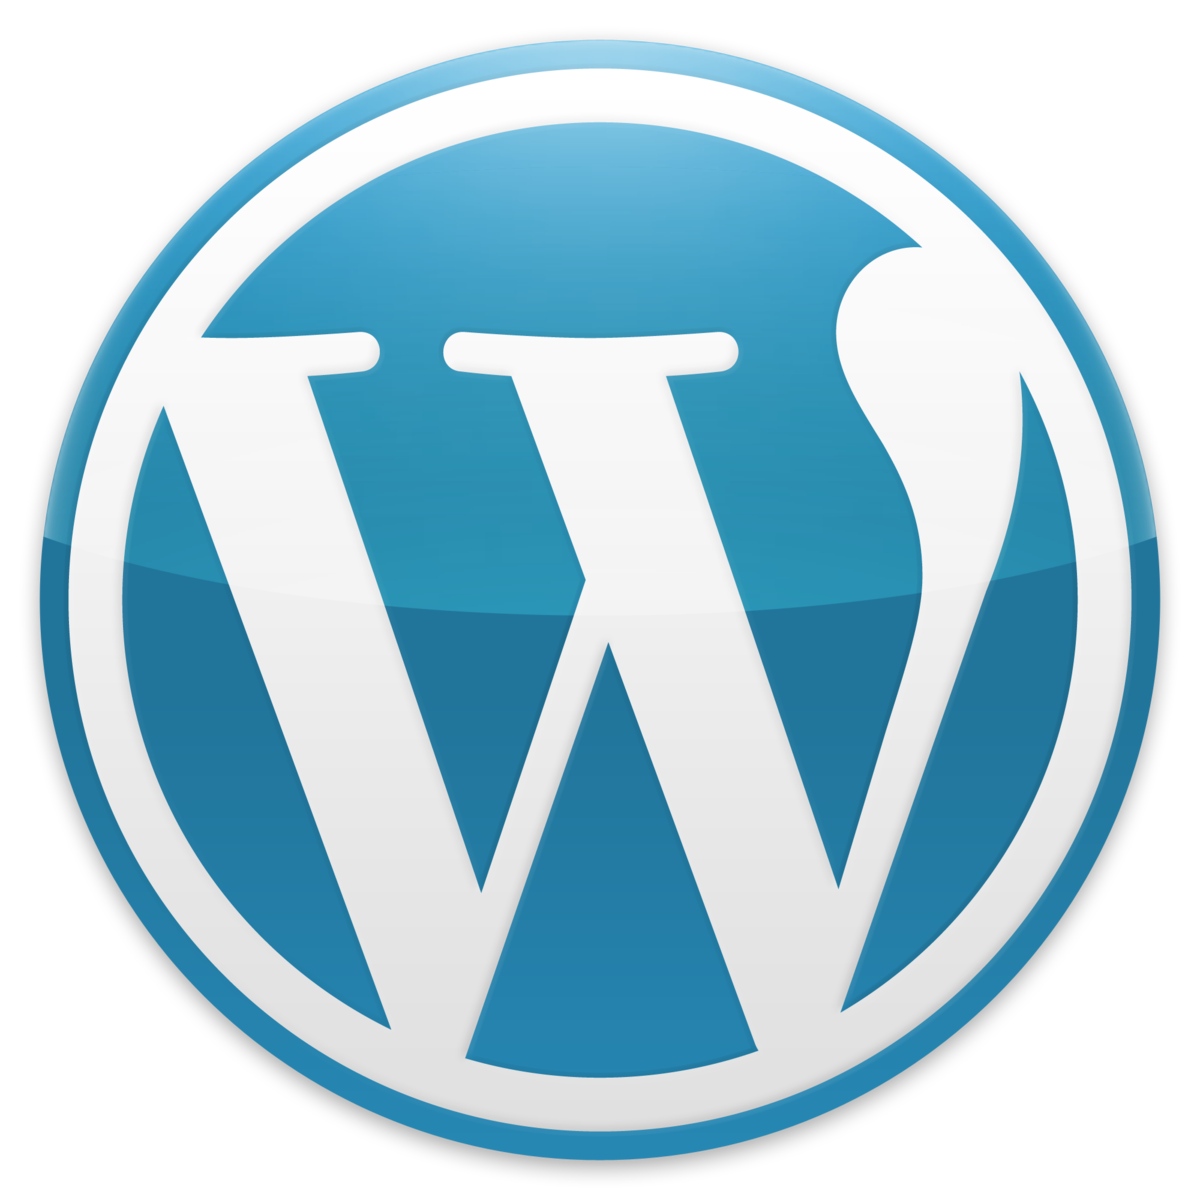 Symphysis Marketing has extensive experience with Wordpress for small businesses